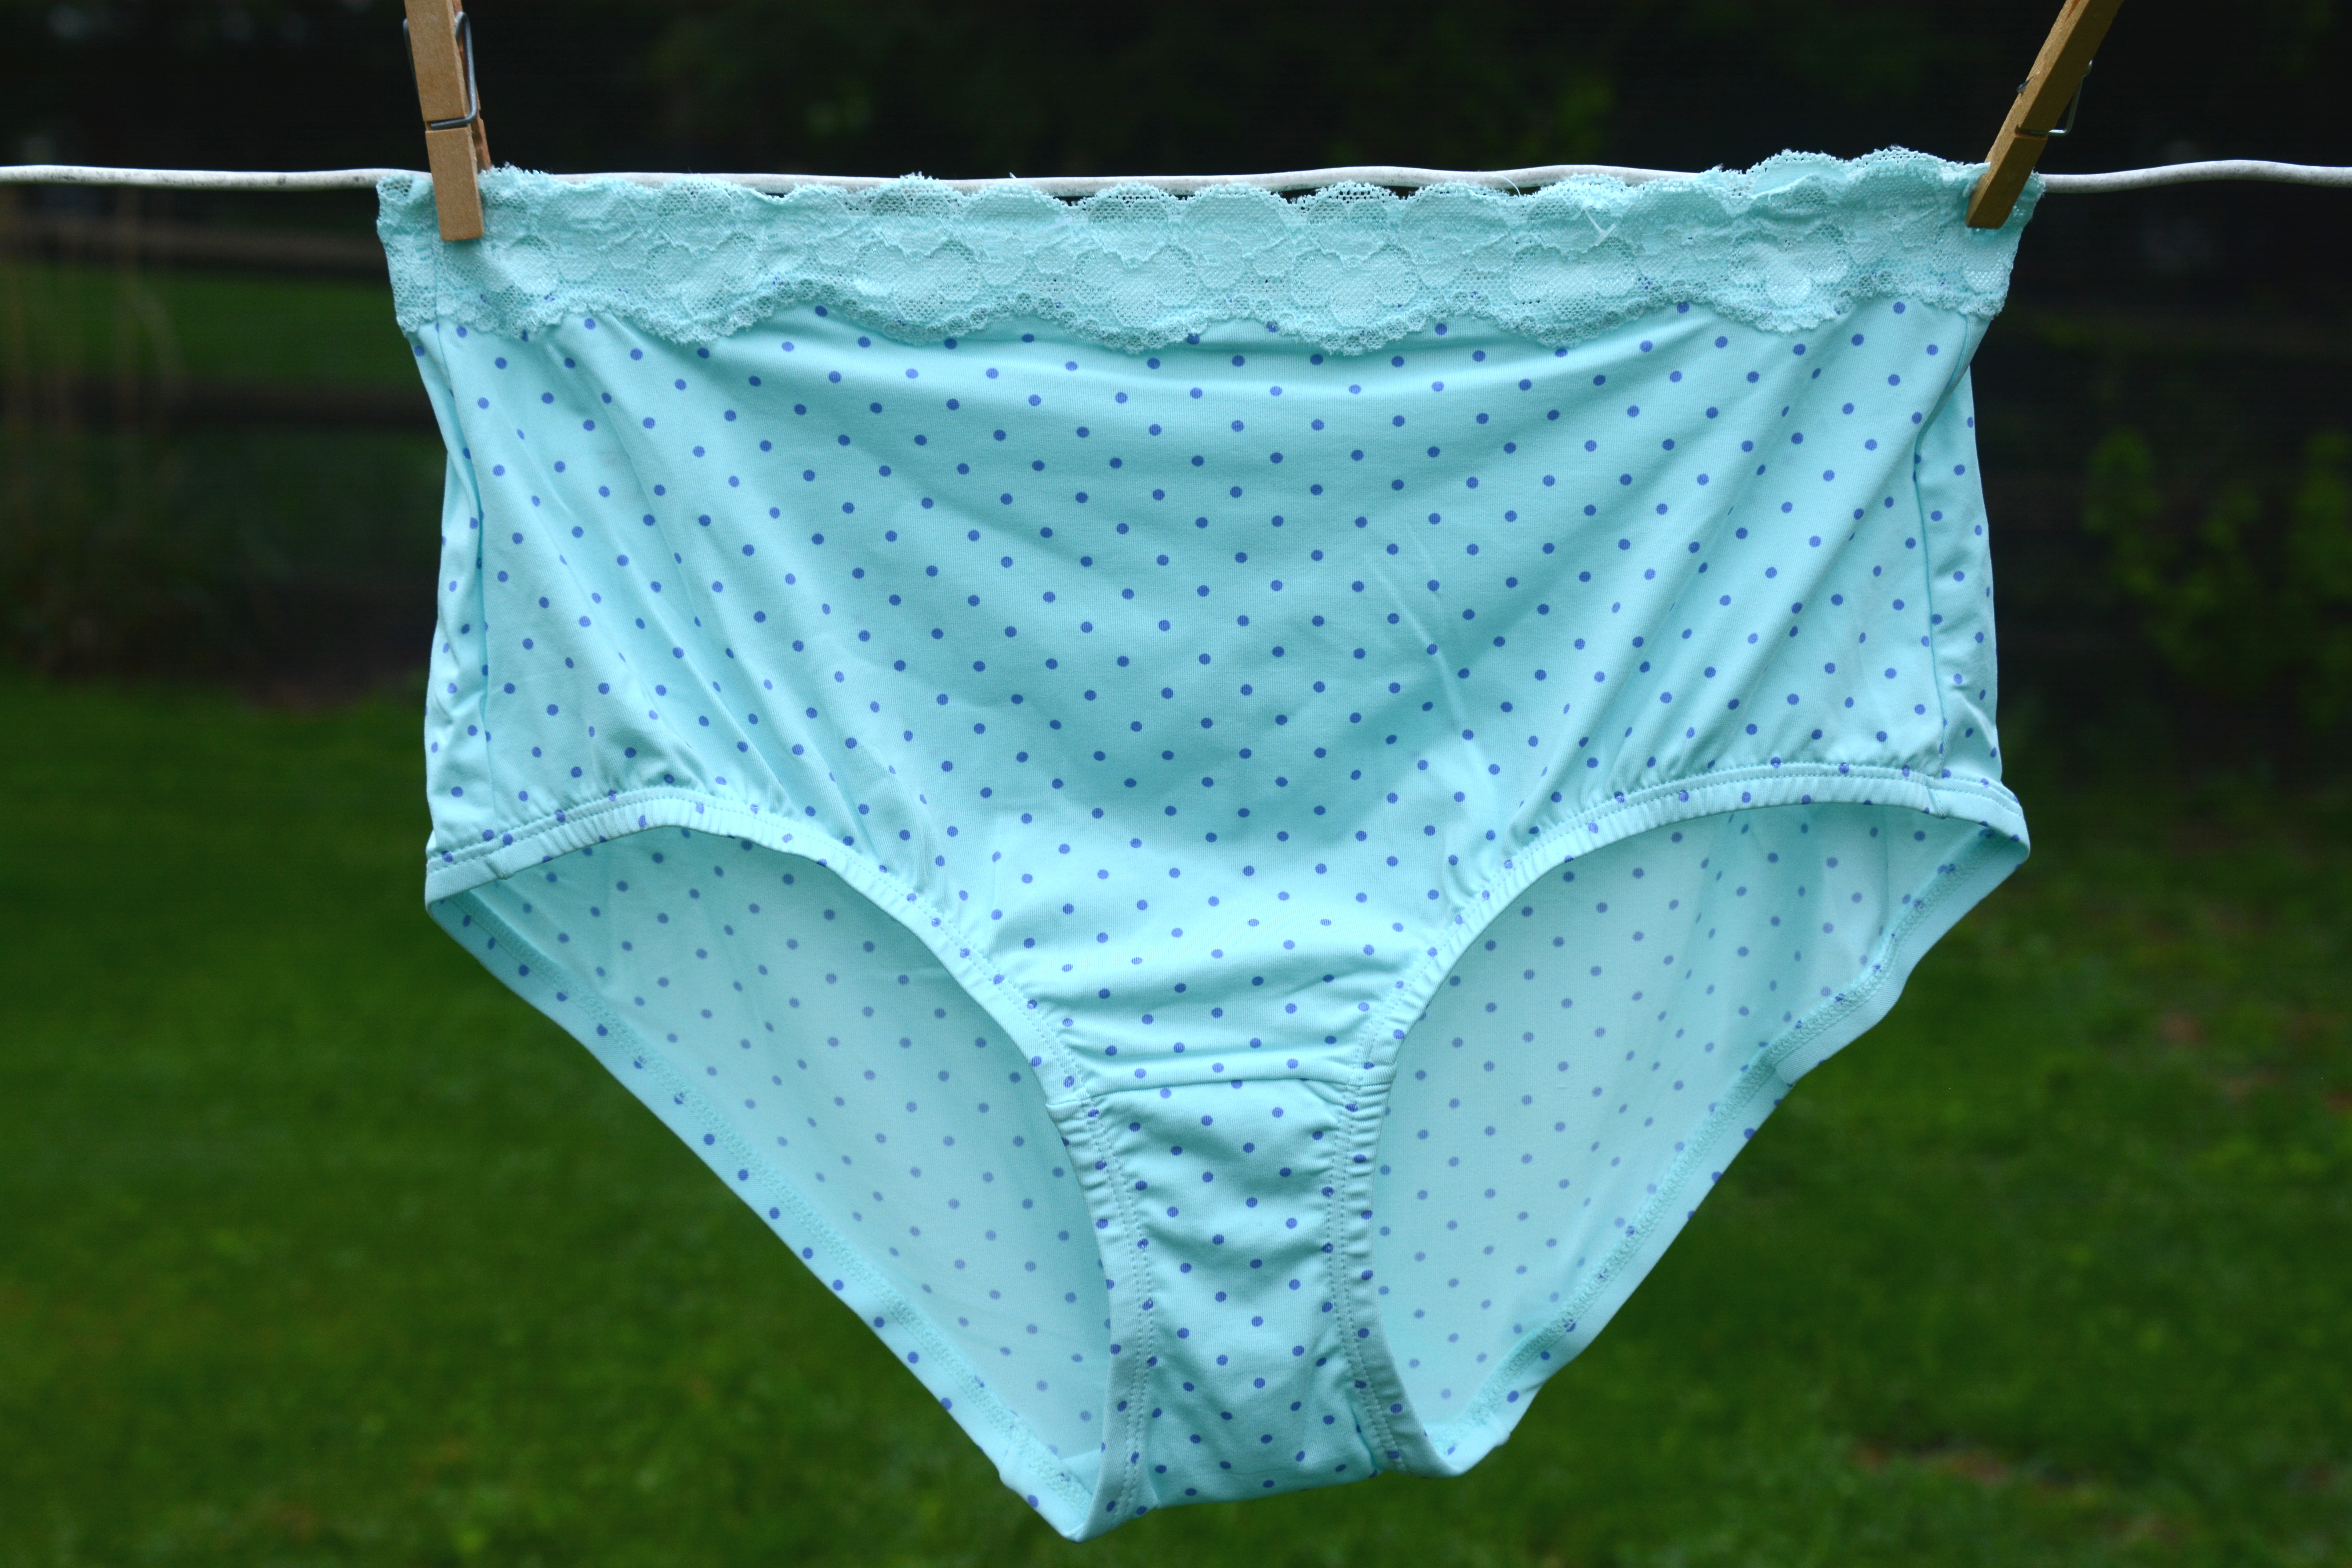 Zambia Daily Mail - Ban importation of second-hand underwear Zambia  National Men's Network for Gender and Development has called on Government  to ban the importation of second hand underwear alleging that it